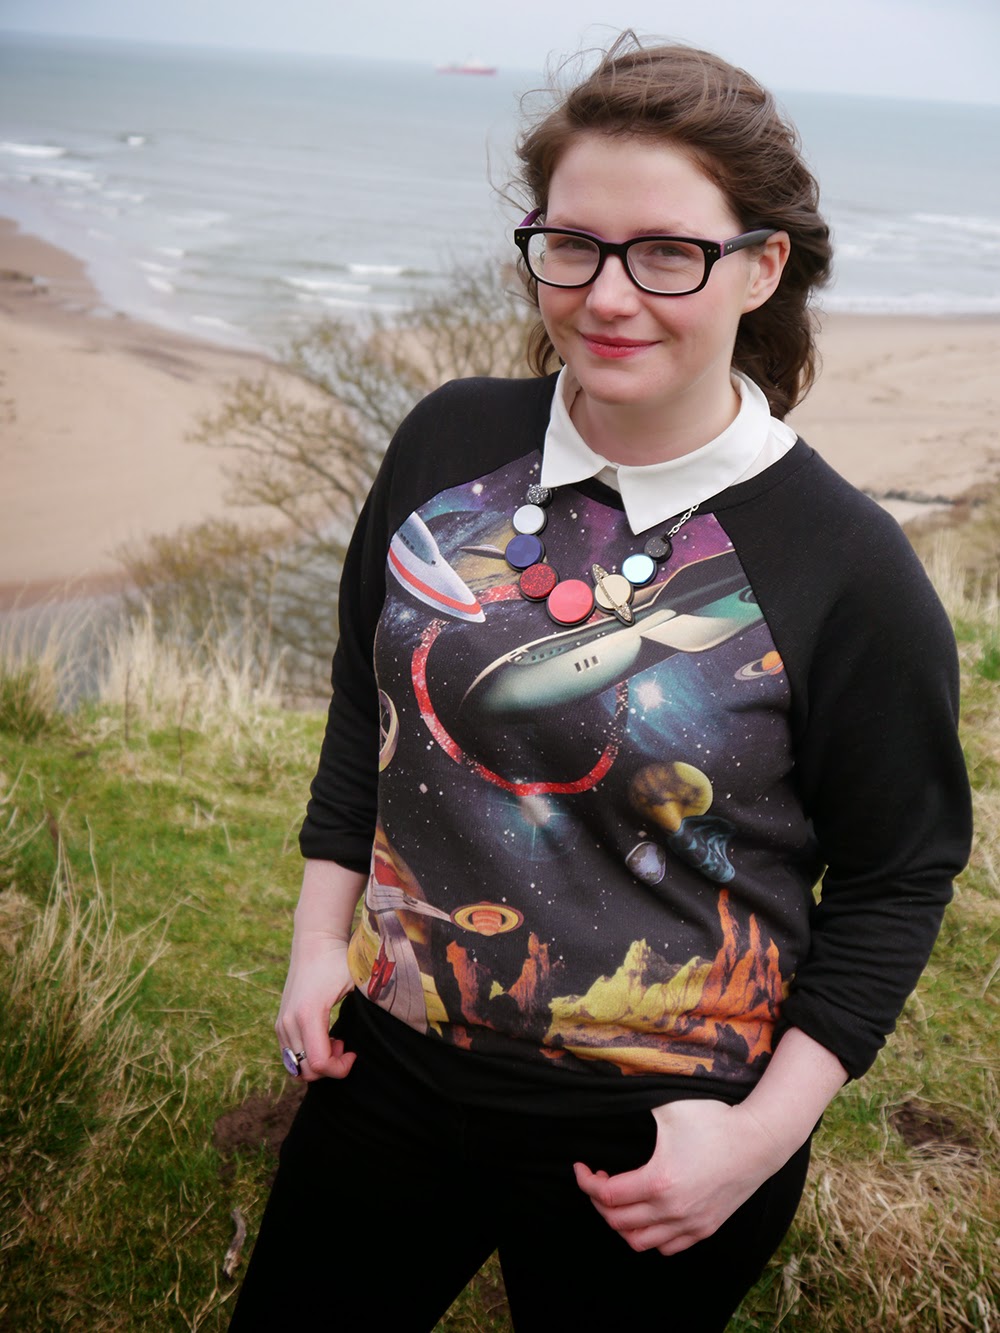 Be Our Guest, Guest Post, Little Sister, Scottish Blogger, Heather Mac, Mac In Your Face, Space Style, Topshop space jumper, Sugar & Vice space necklace, Lunan bay, Red Castle, Scotalnd, outfit post